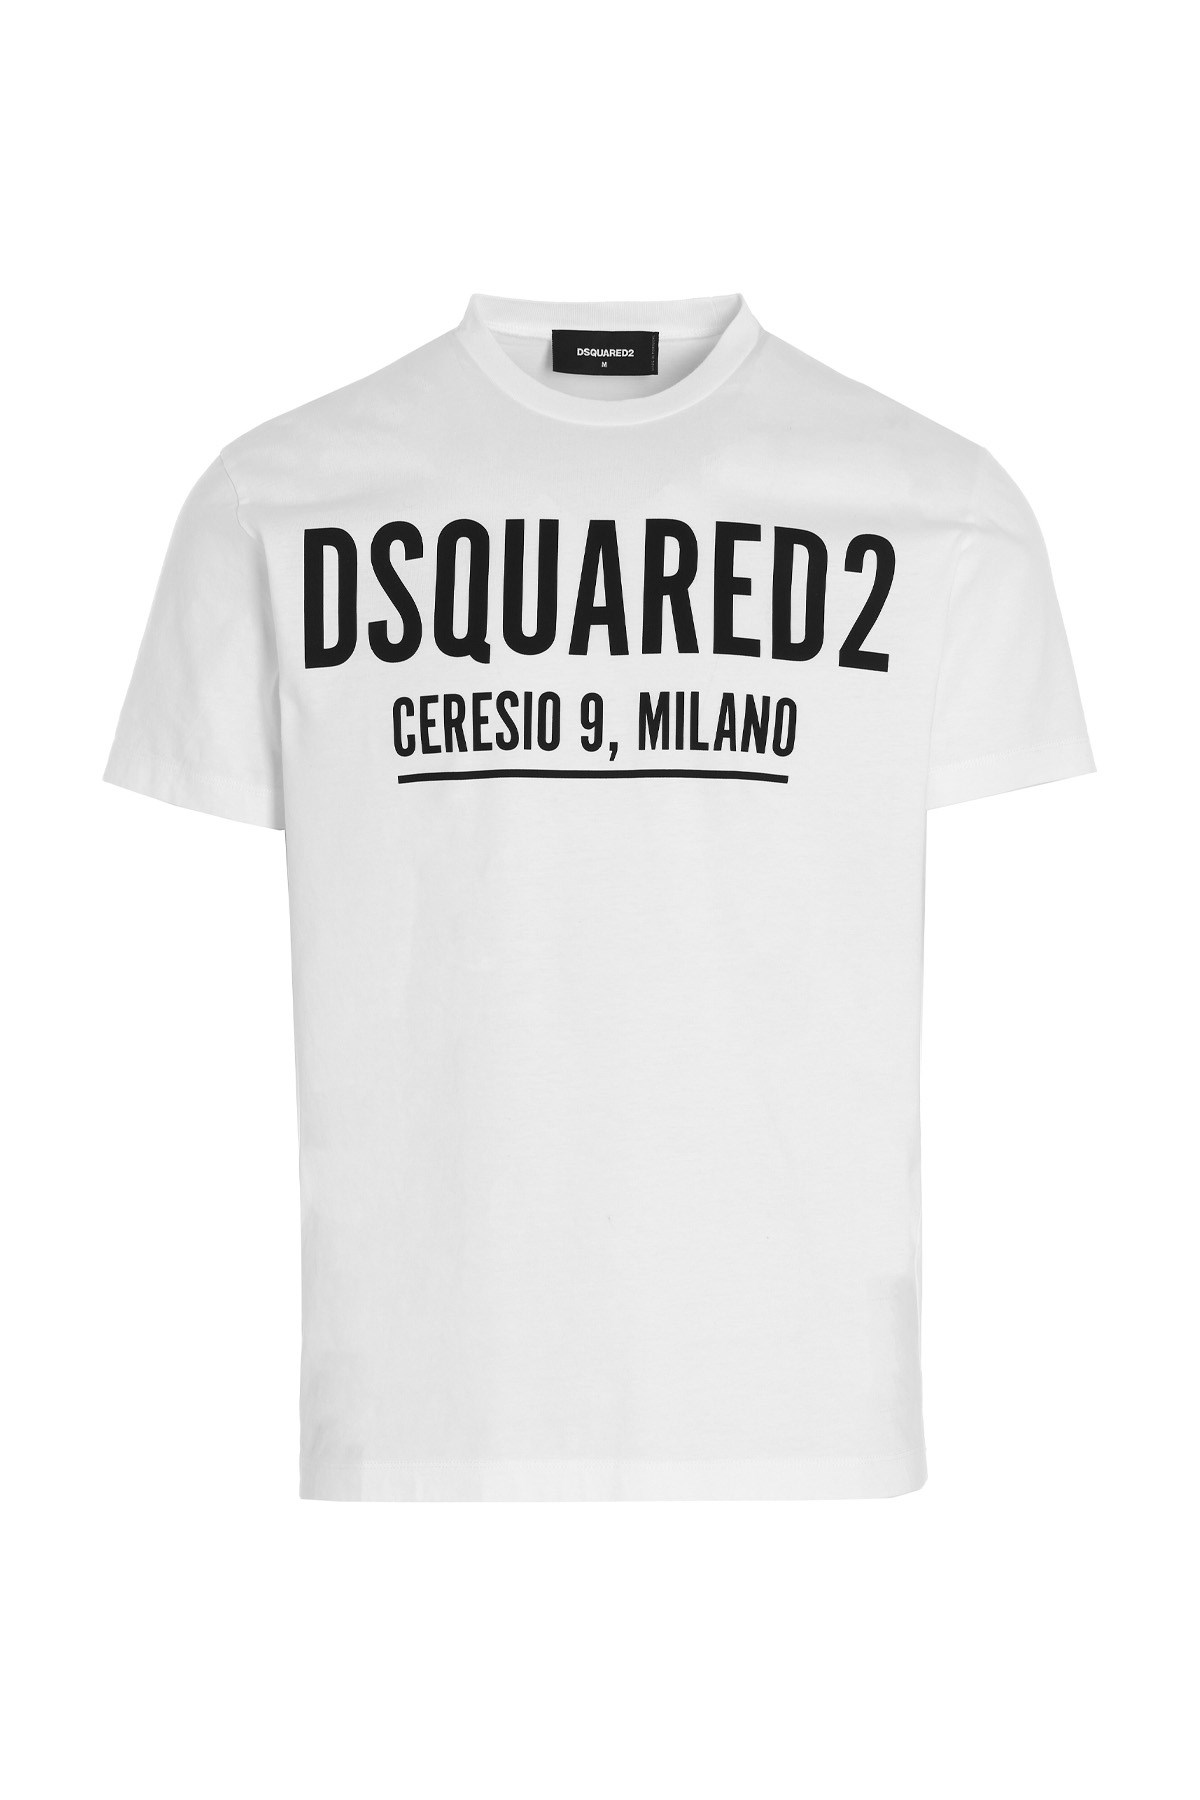 DSQUARED2 T-Shirt 'Ceresio9 Cool'